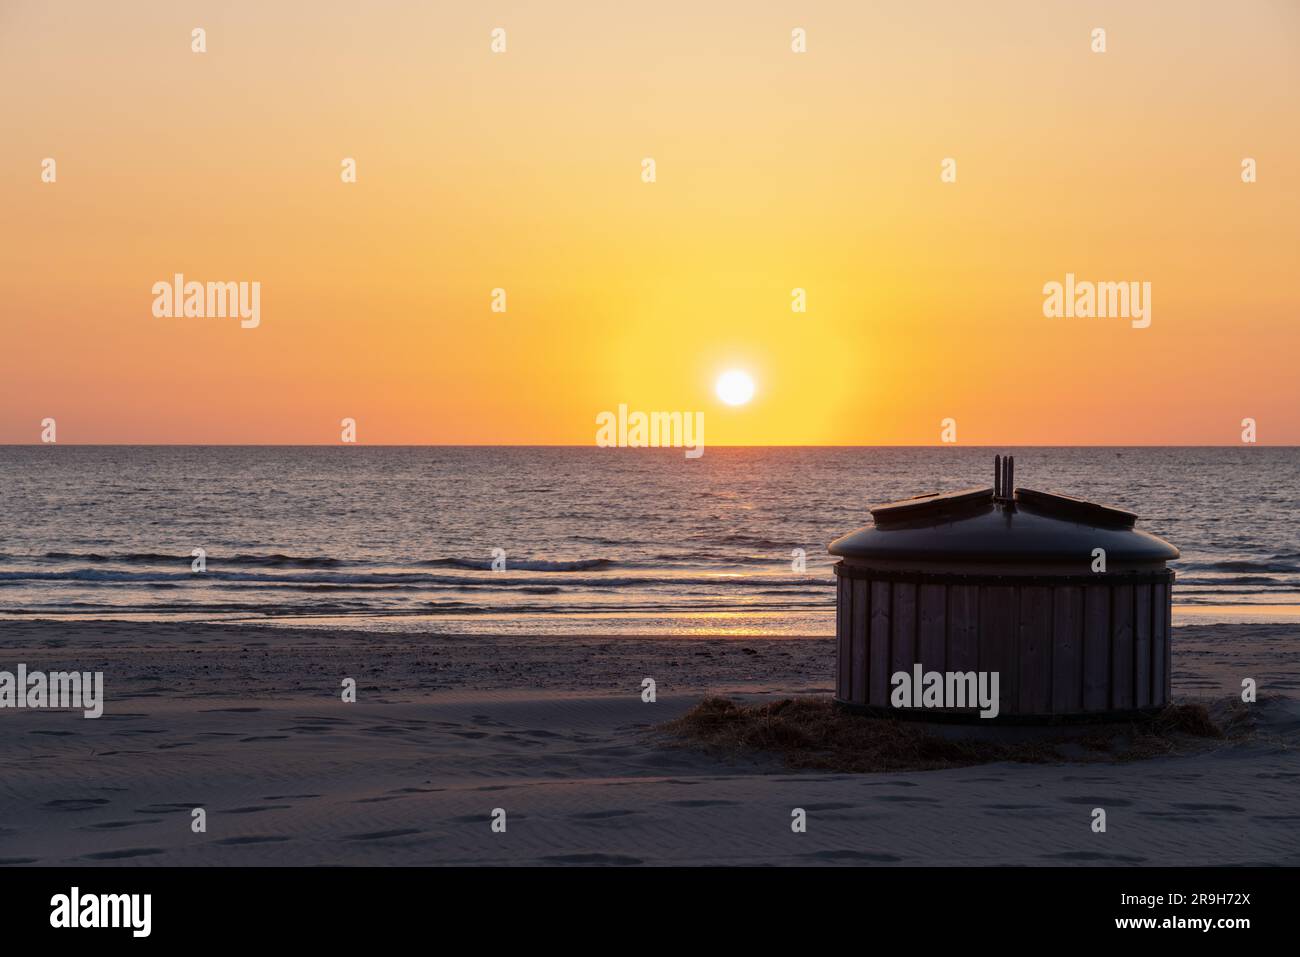 On this beautiful beach whit sunset, there is a trash can where people can deposit their dirt. Stock Photo